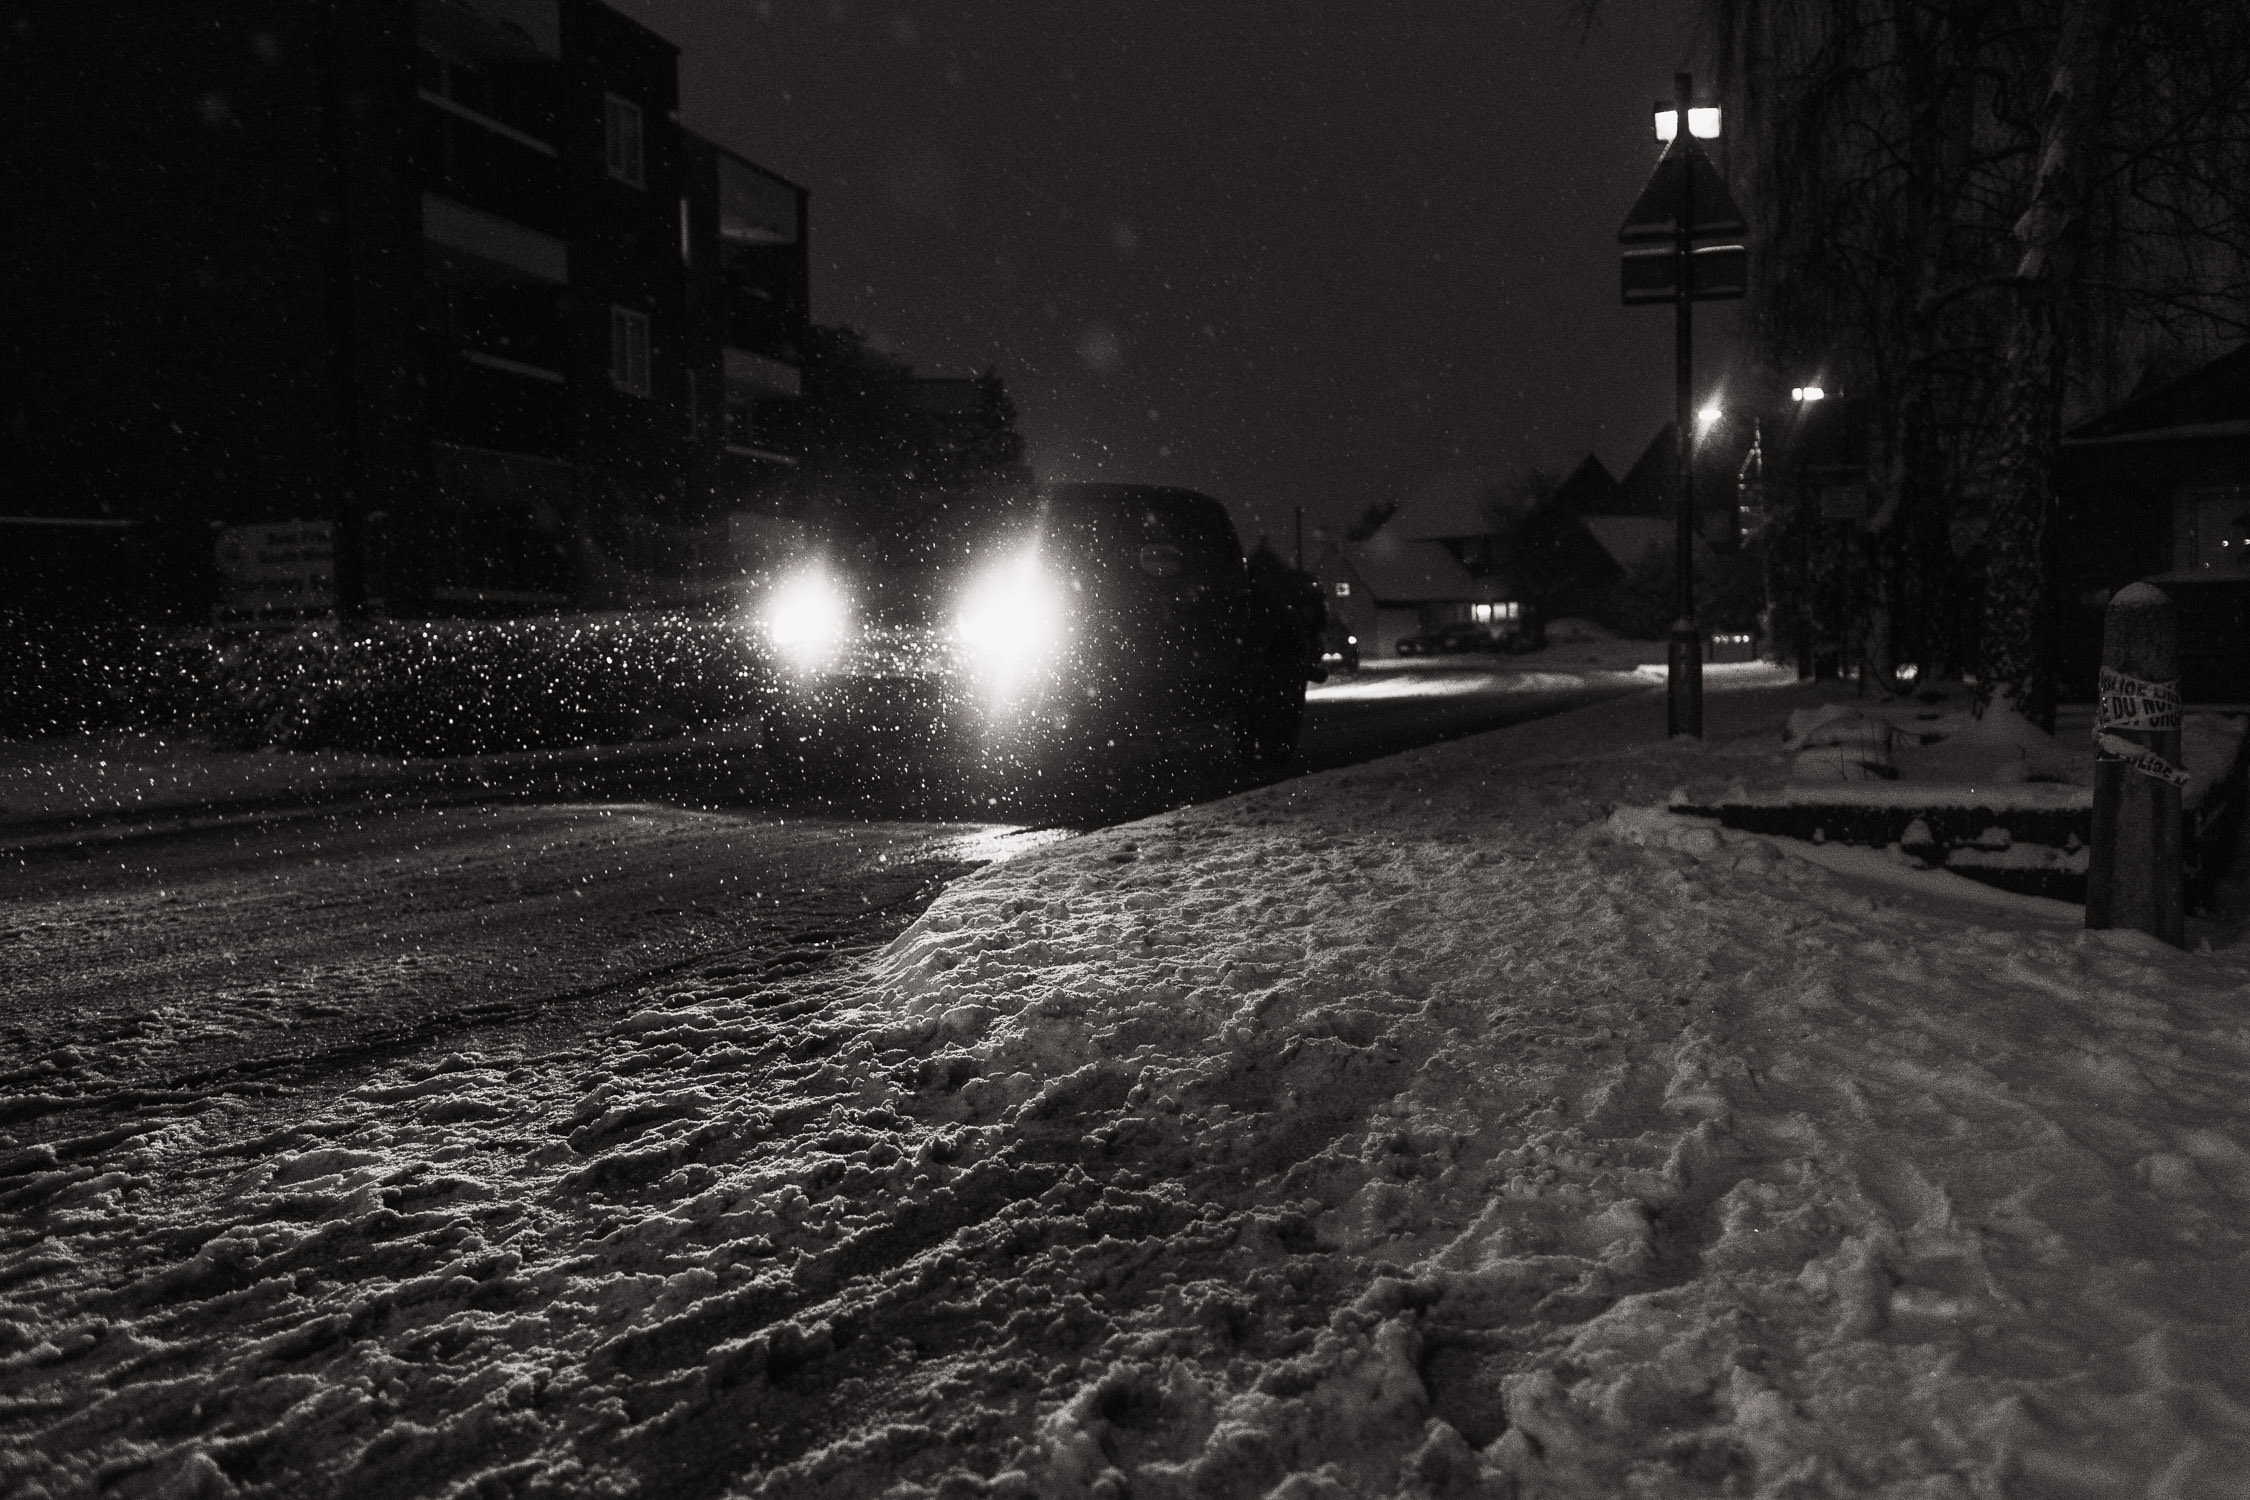 A car approaching the South Woodham Ferrers station on Hullbridge Road at night, amidst a snowy scene. In the background, The Cedars flats are visible.